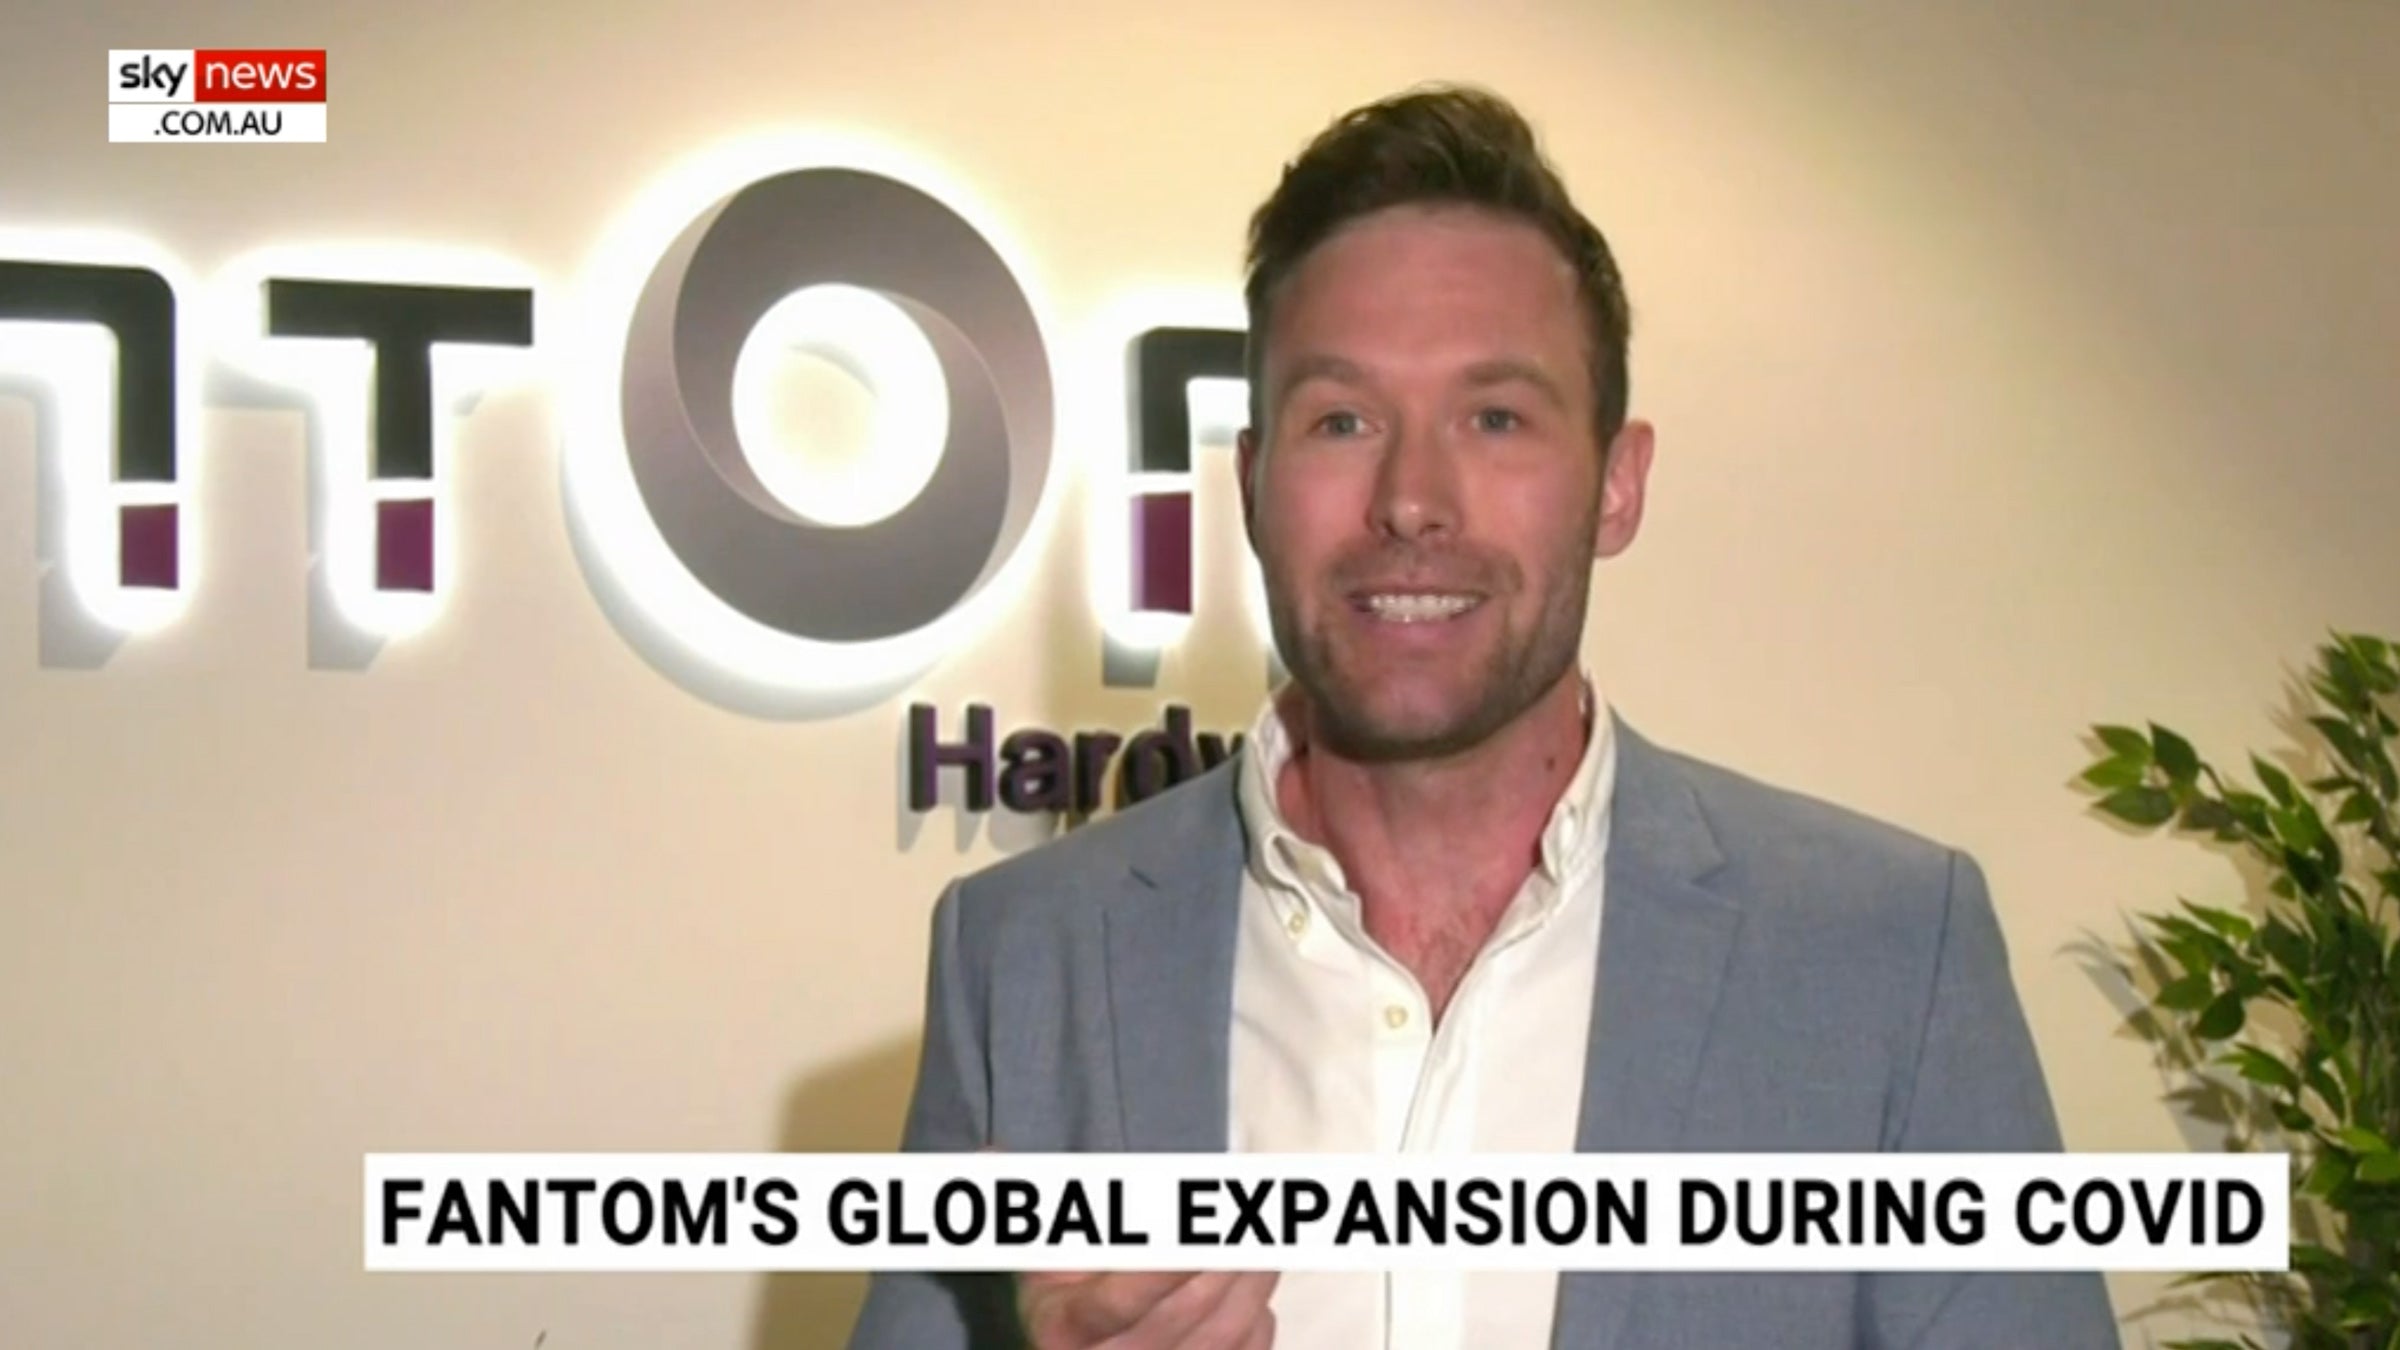 Sky News Interview-Fantom's global expansion during COVID-19.